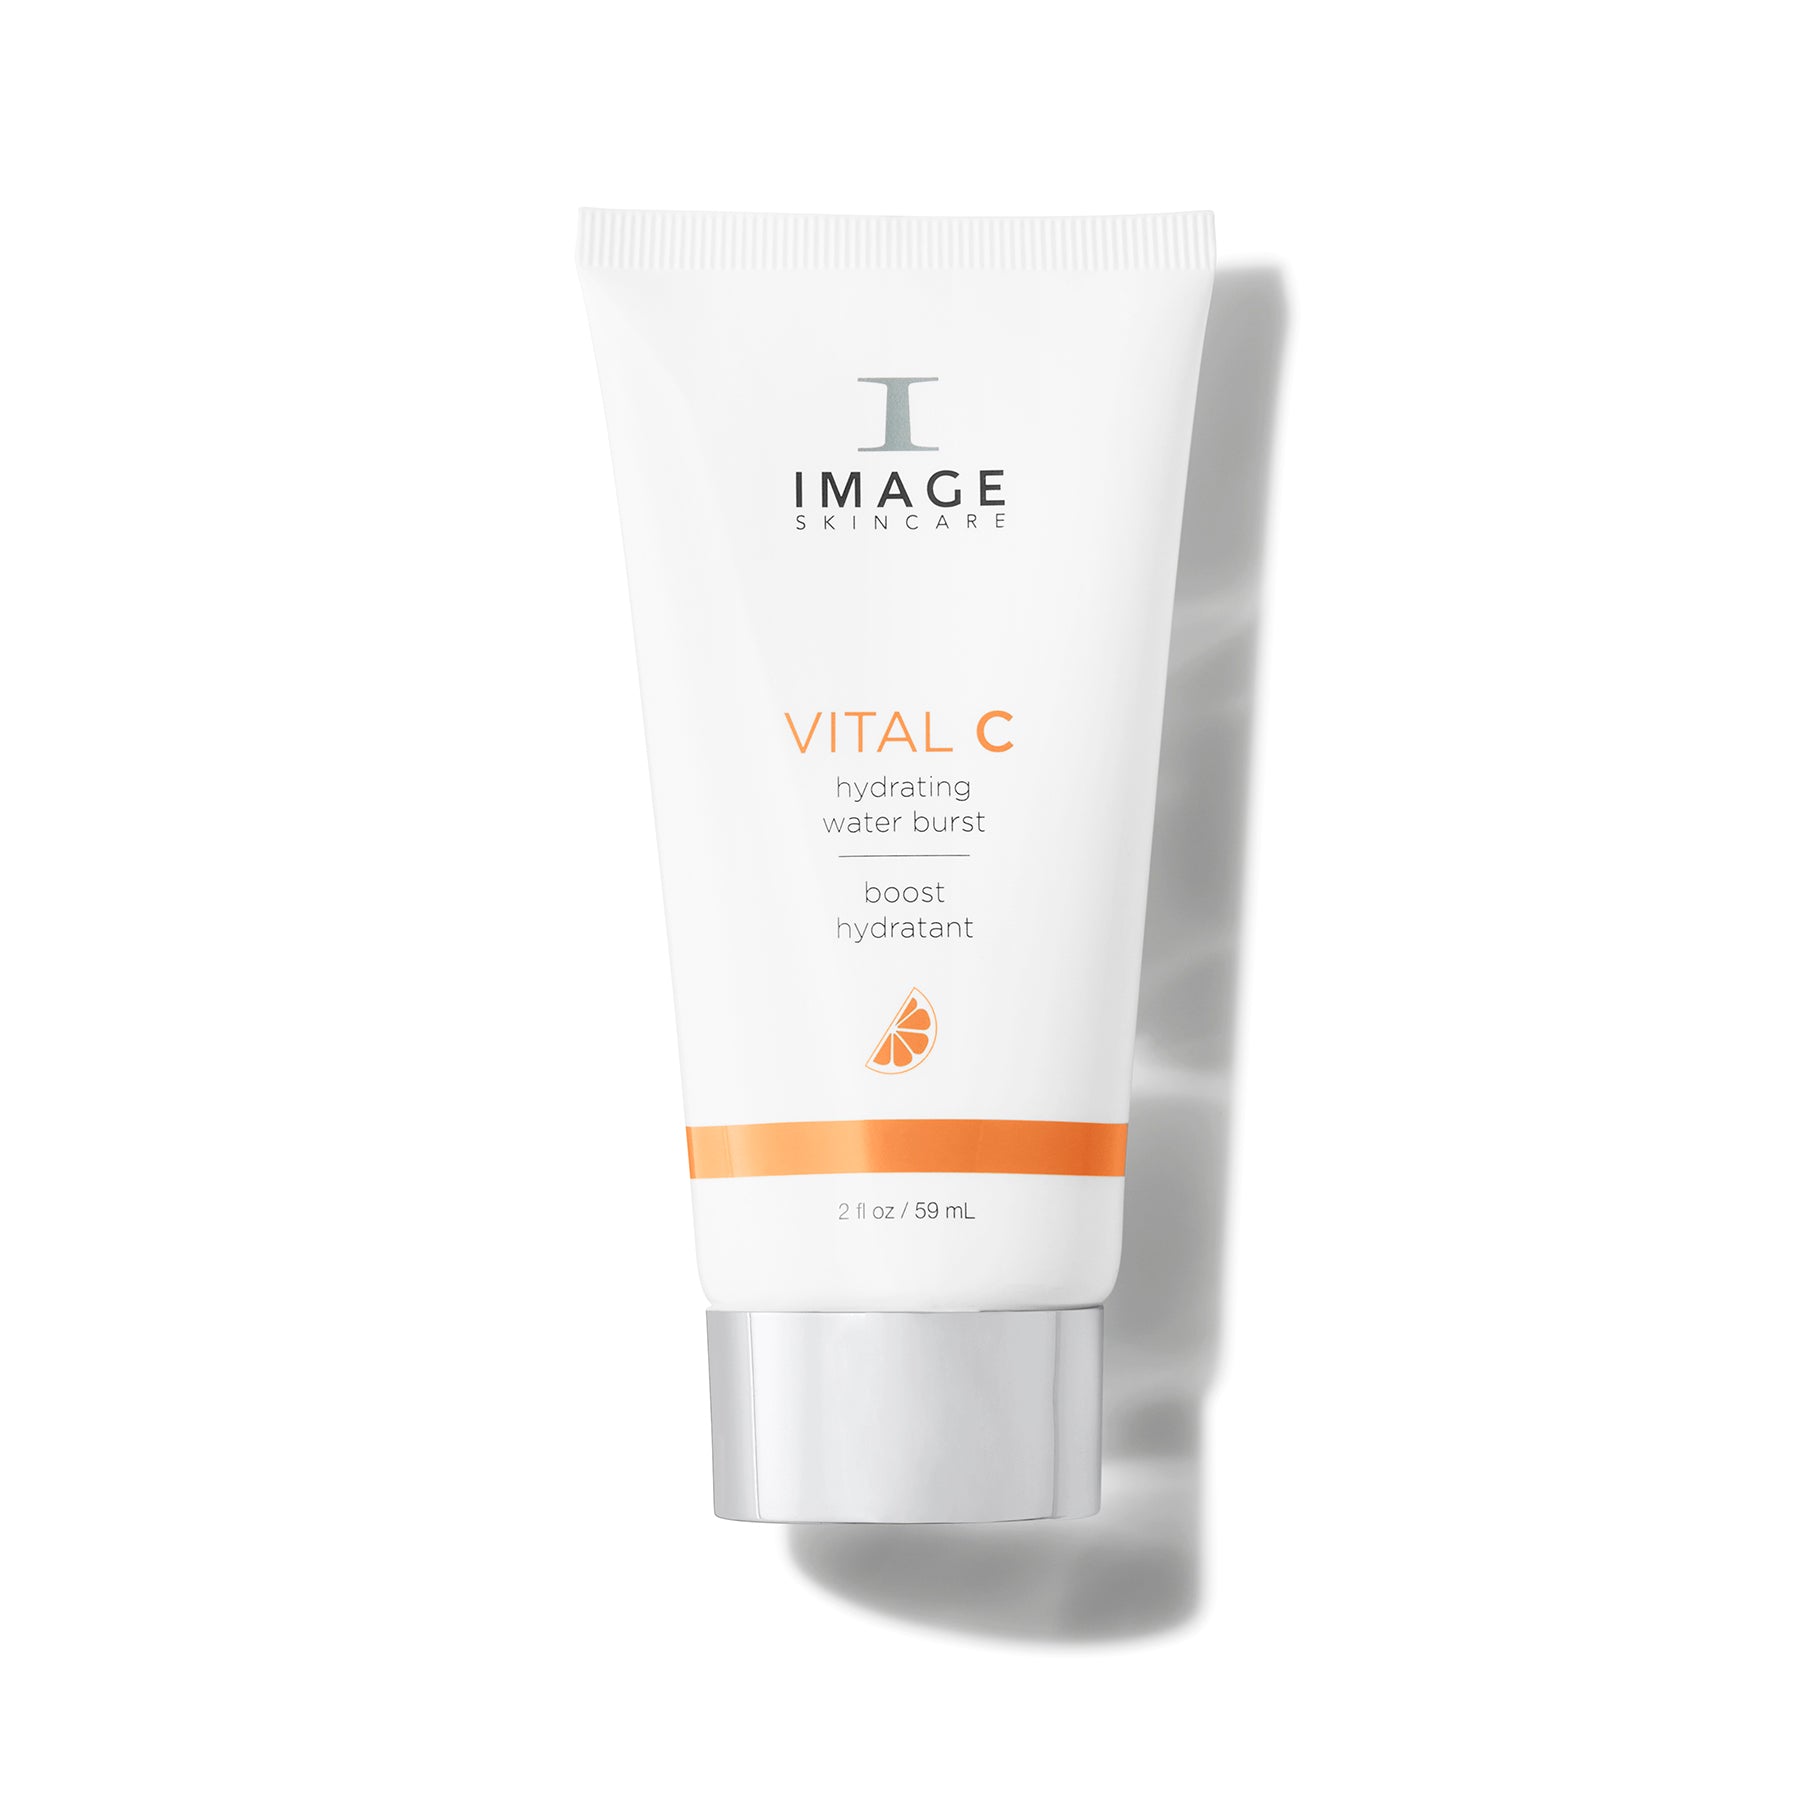 Image Skincare Vital C Hydrating Water Burst Shop At Exclusive Beauty